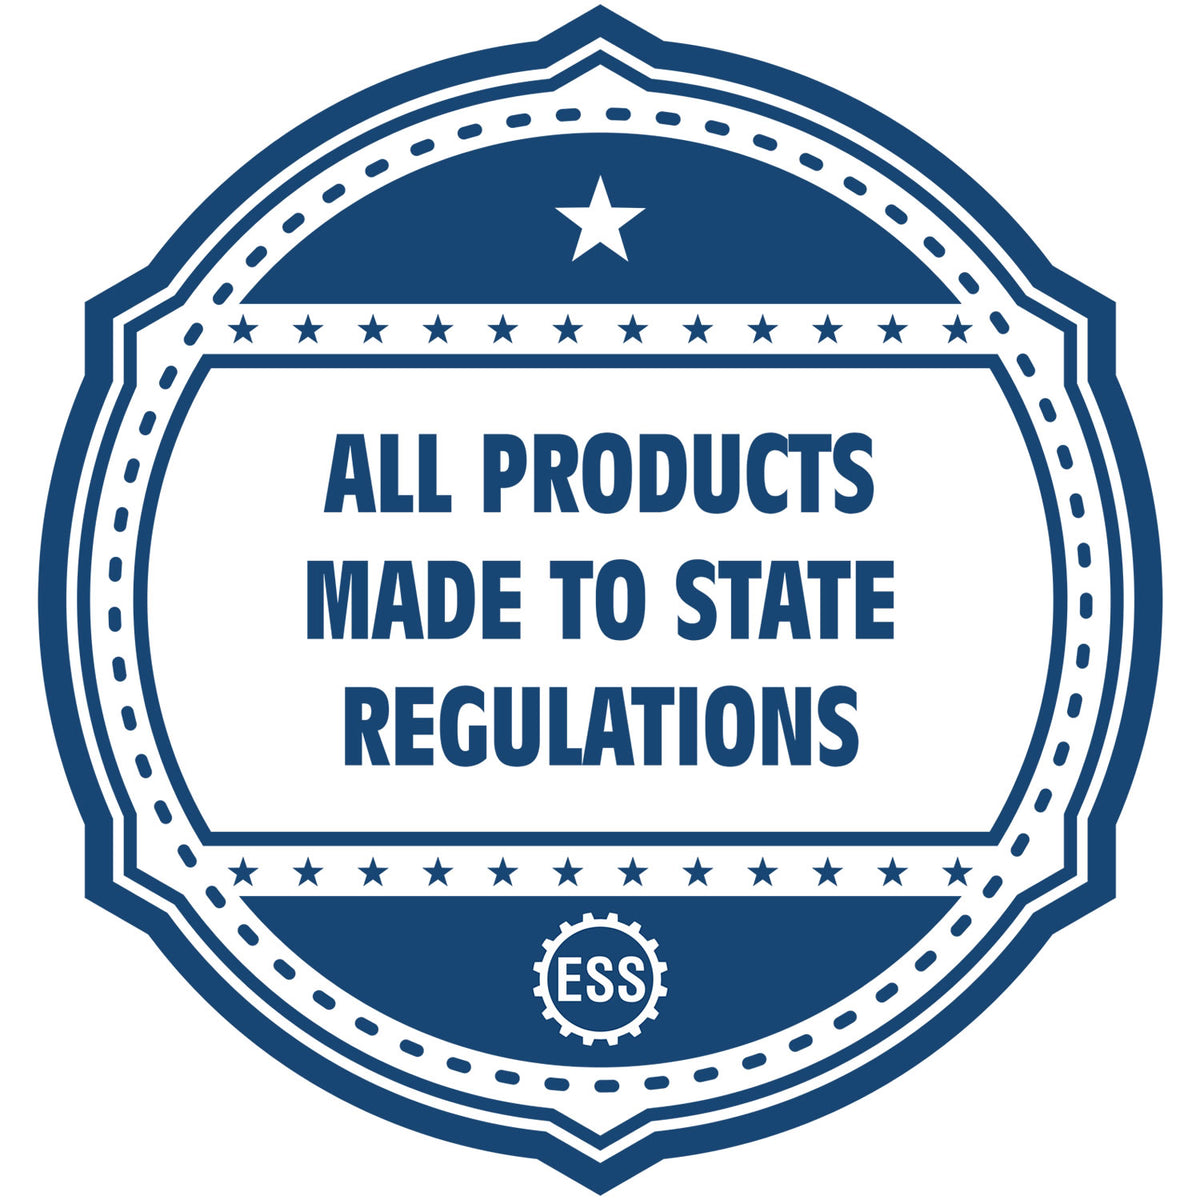 An icon or badge element for the Soft Pocket Connecticut Landscape Architect Embosser showing that this product is made in compliance with state regulations.